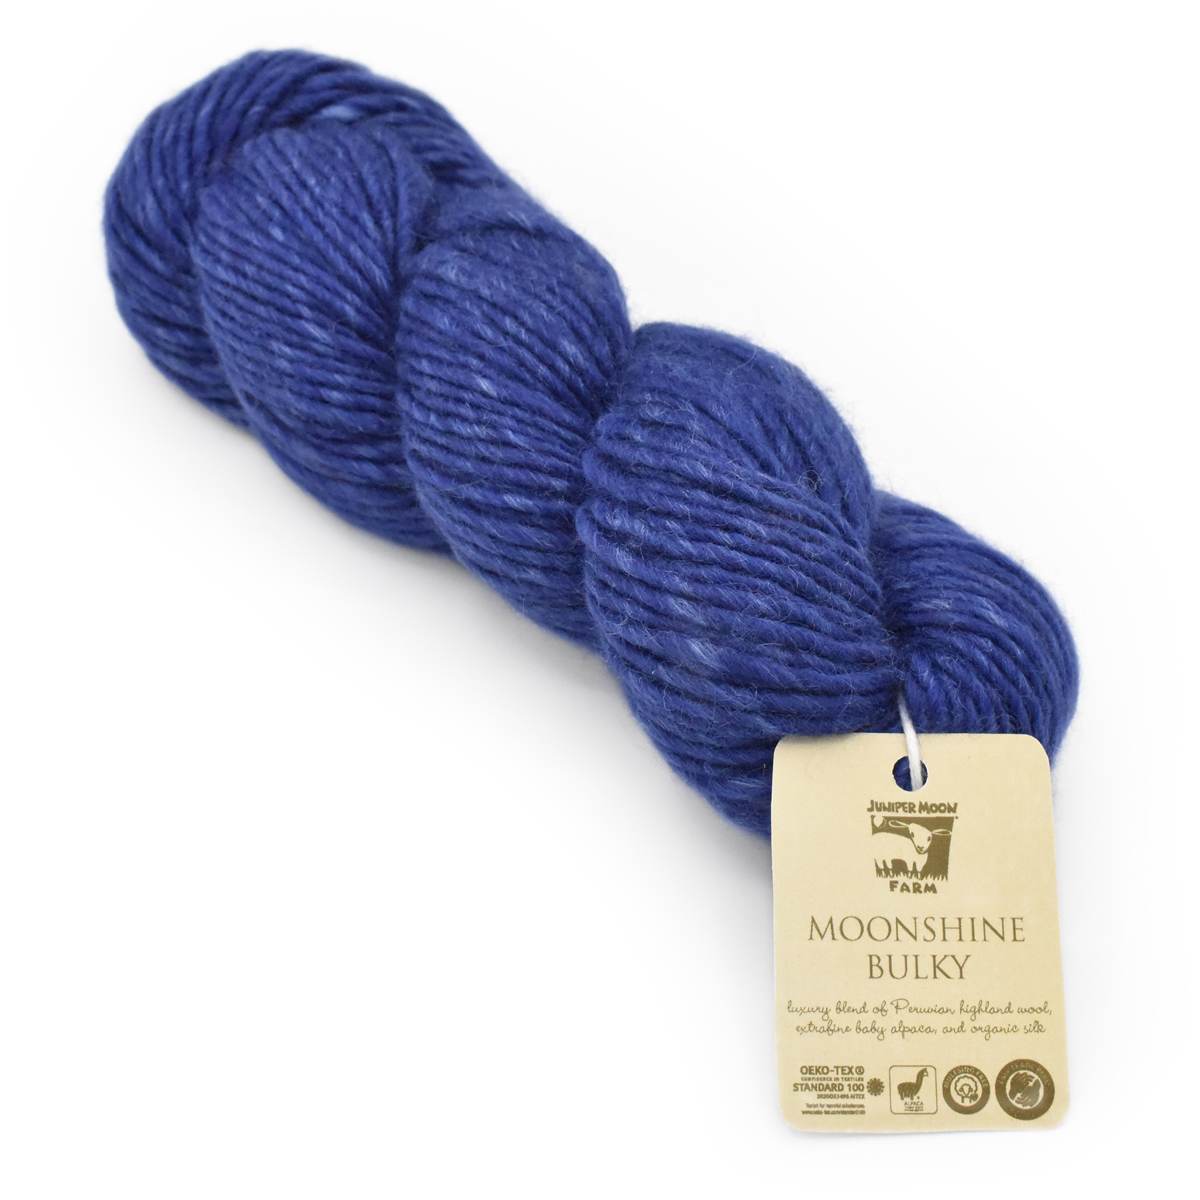 a skein of Moonshine Bulky